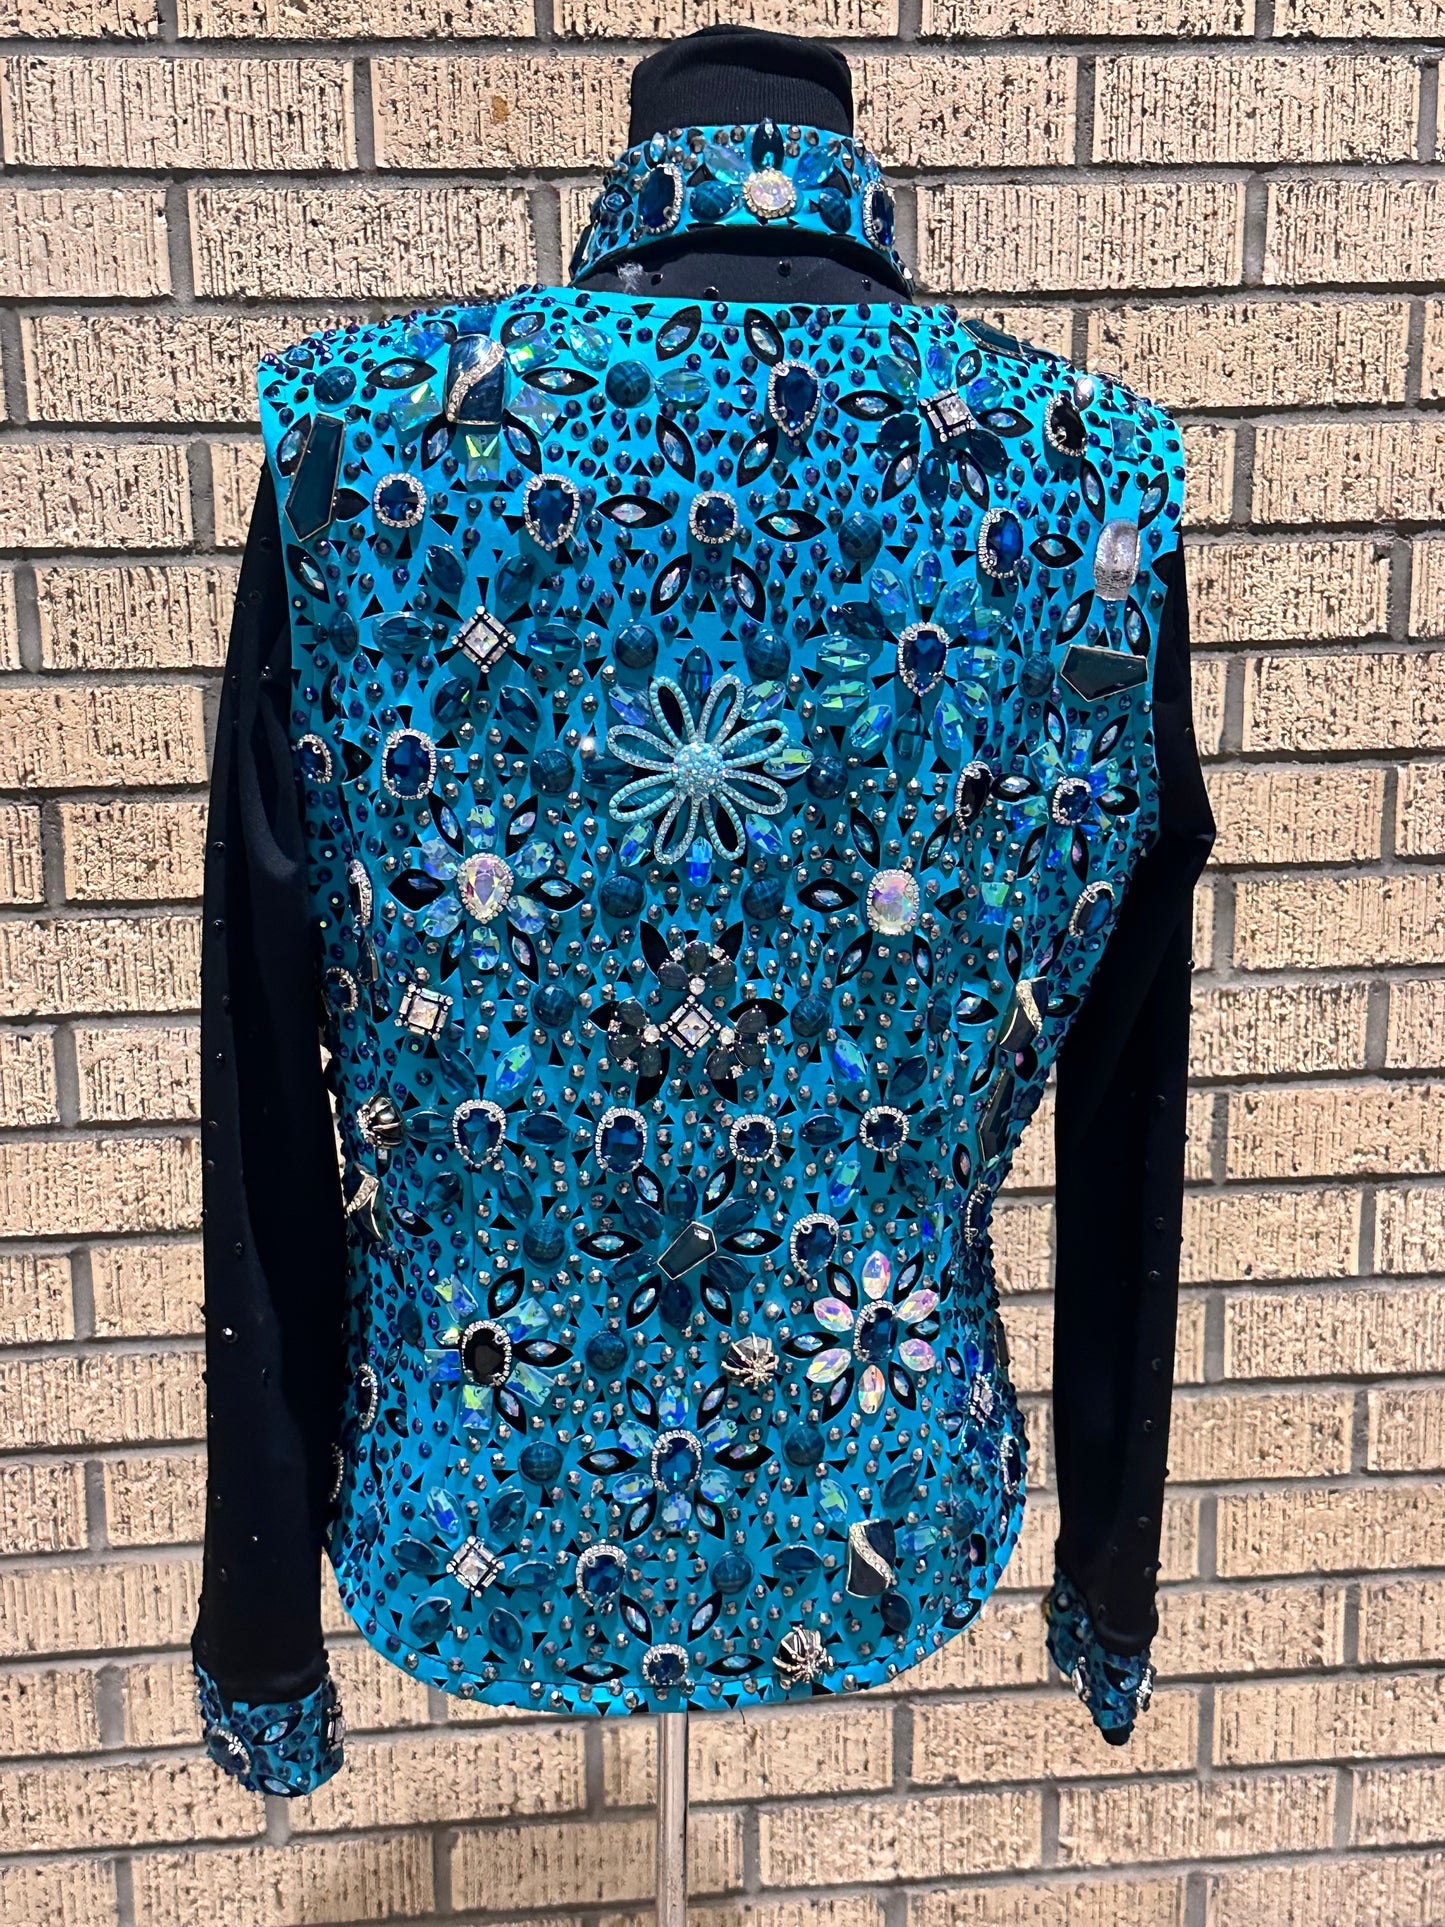 Size LARGE black and turquoise vest set with turquoise, black and silver designs